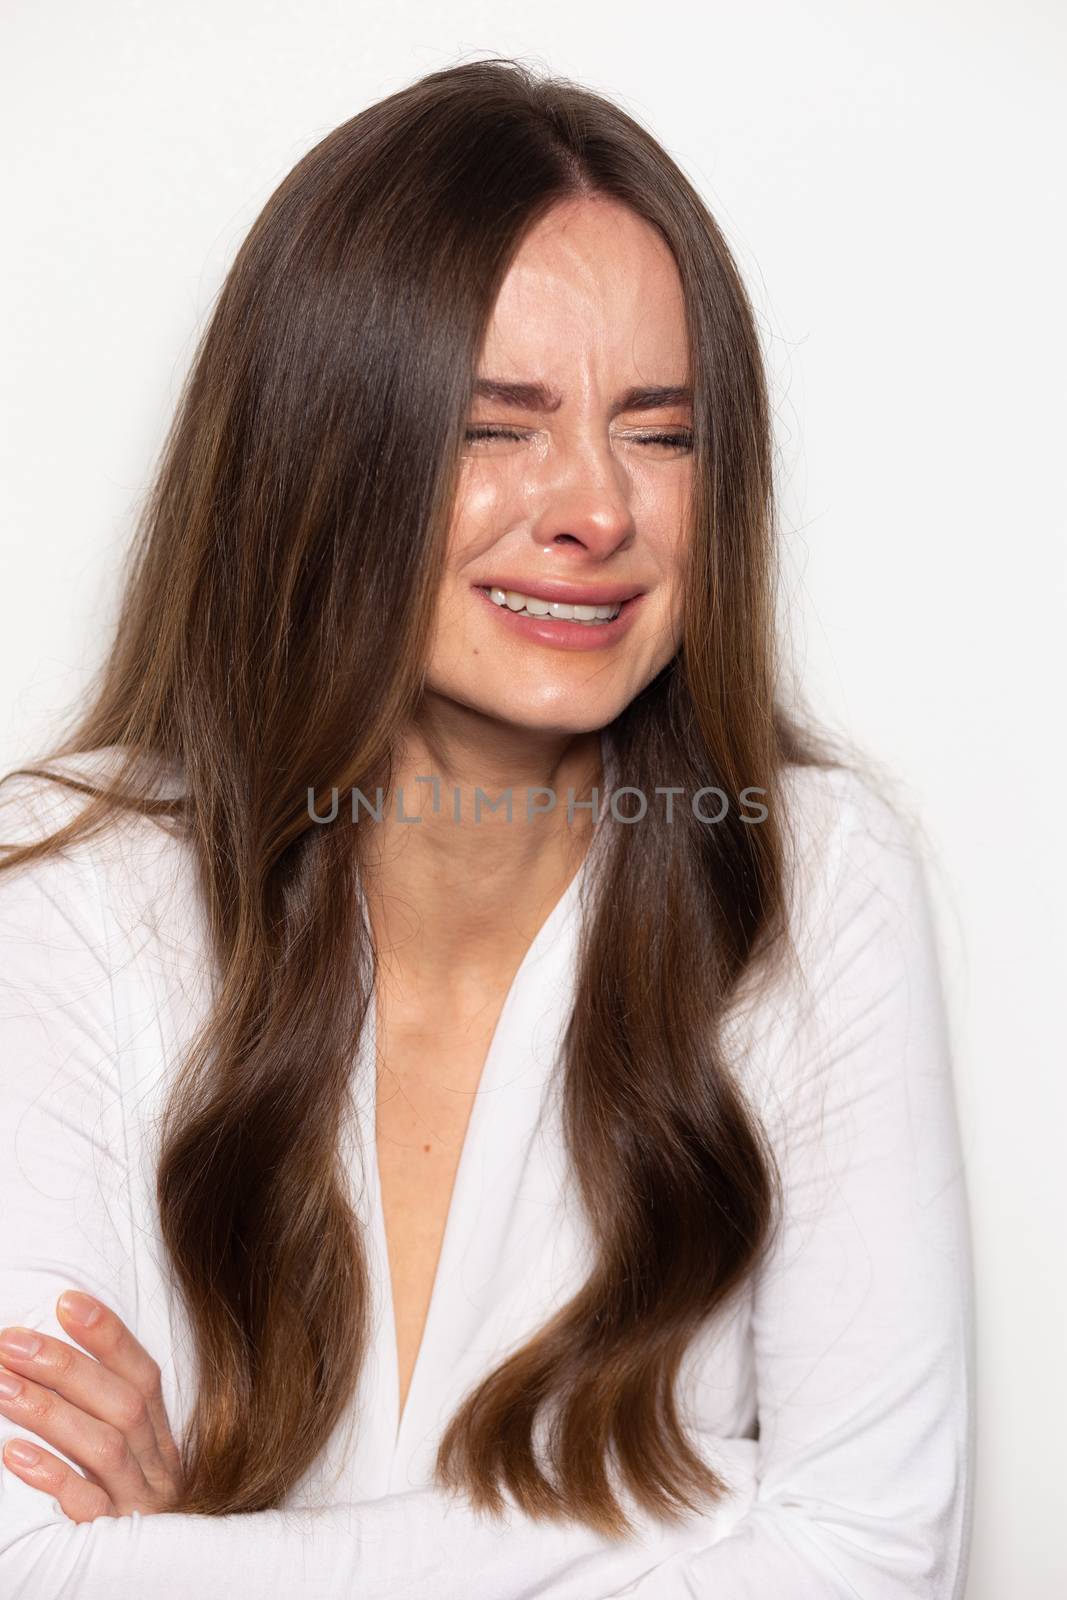 crying woman person cry real emotion depression unhappy girl wet eyes isoleted